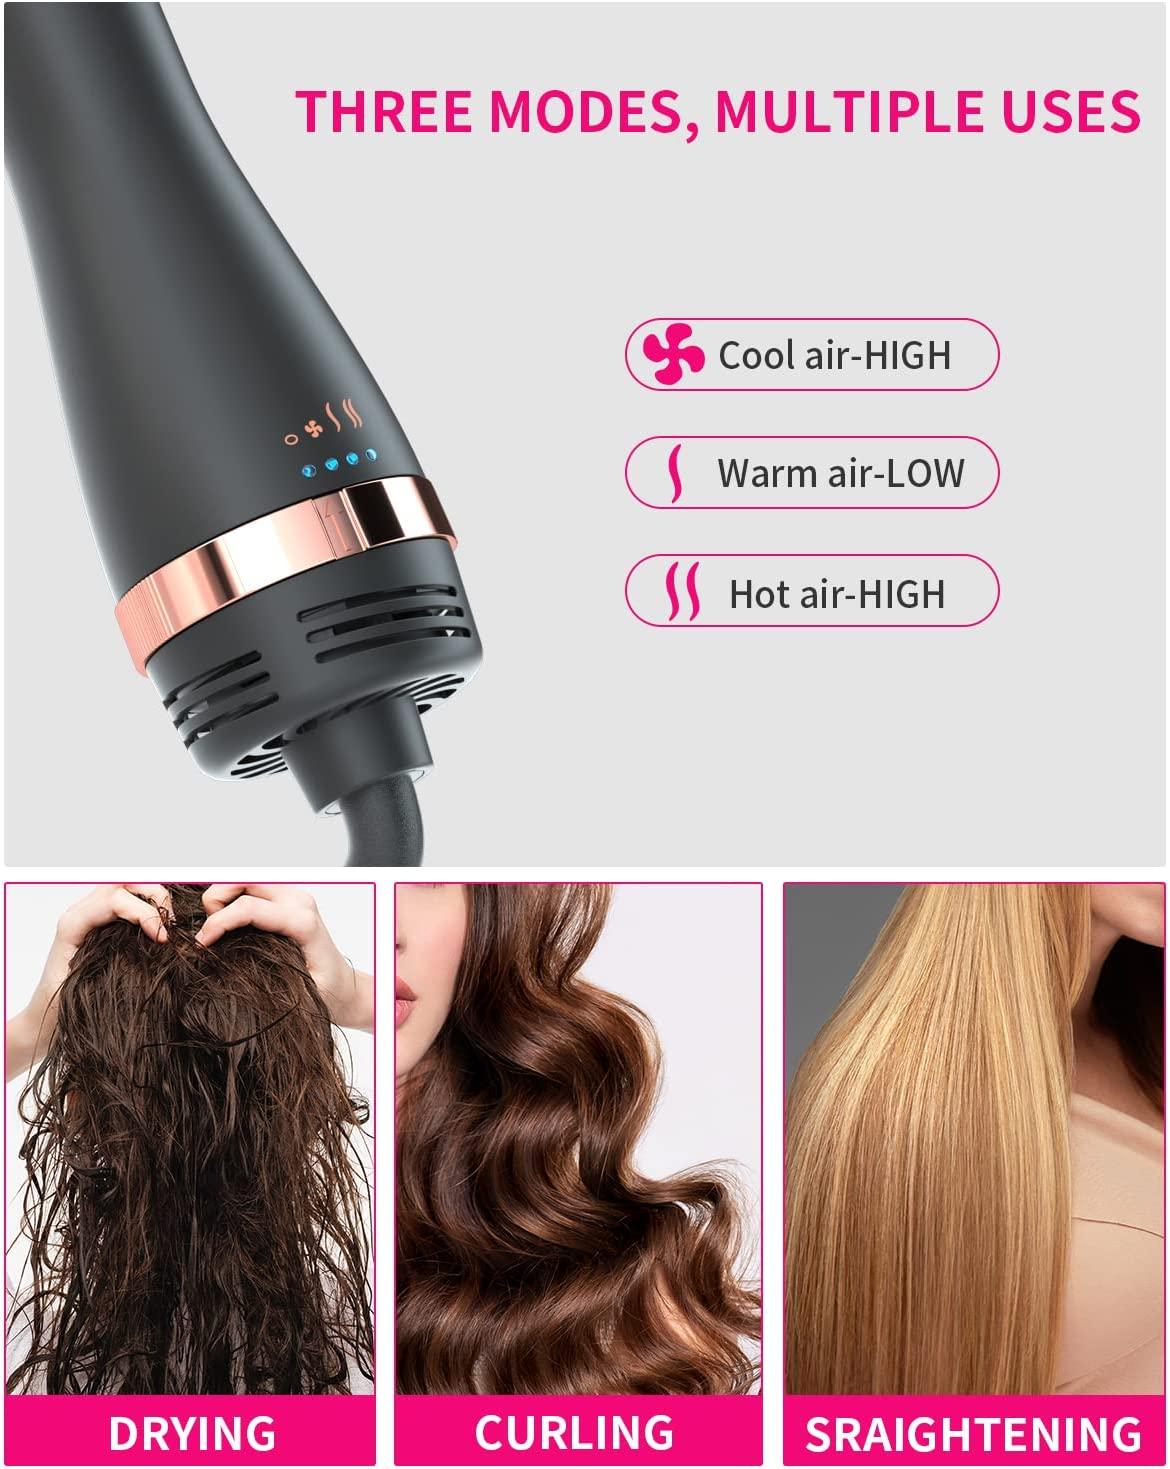 Hair Dryer Brush, One-Step Blow Dryer Brush 4 in 1 Hair Styler and Dryer,  Professional Styler Volumizer Hot Air Brush with Salon Negative Ionic for  Fast Drying, Straightening & Curling Black